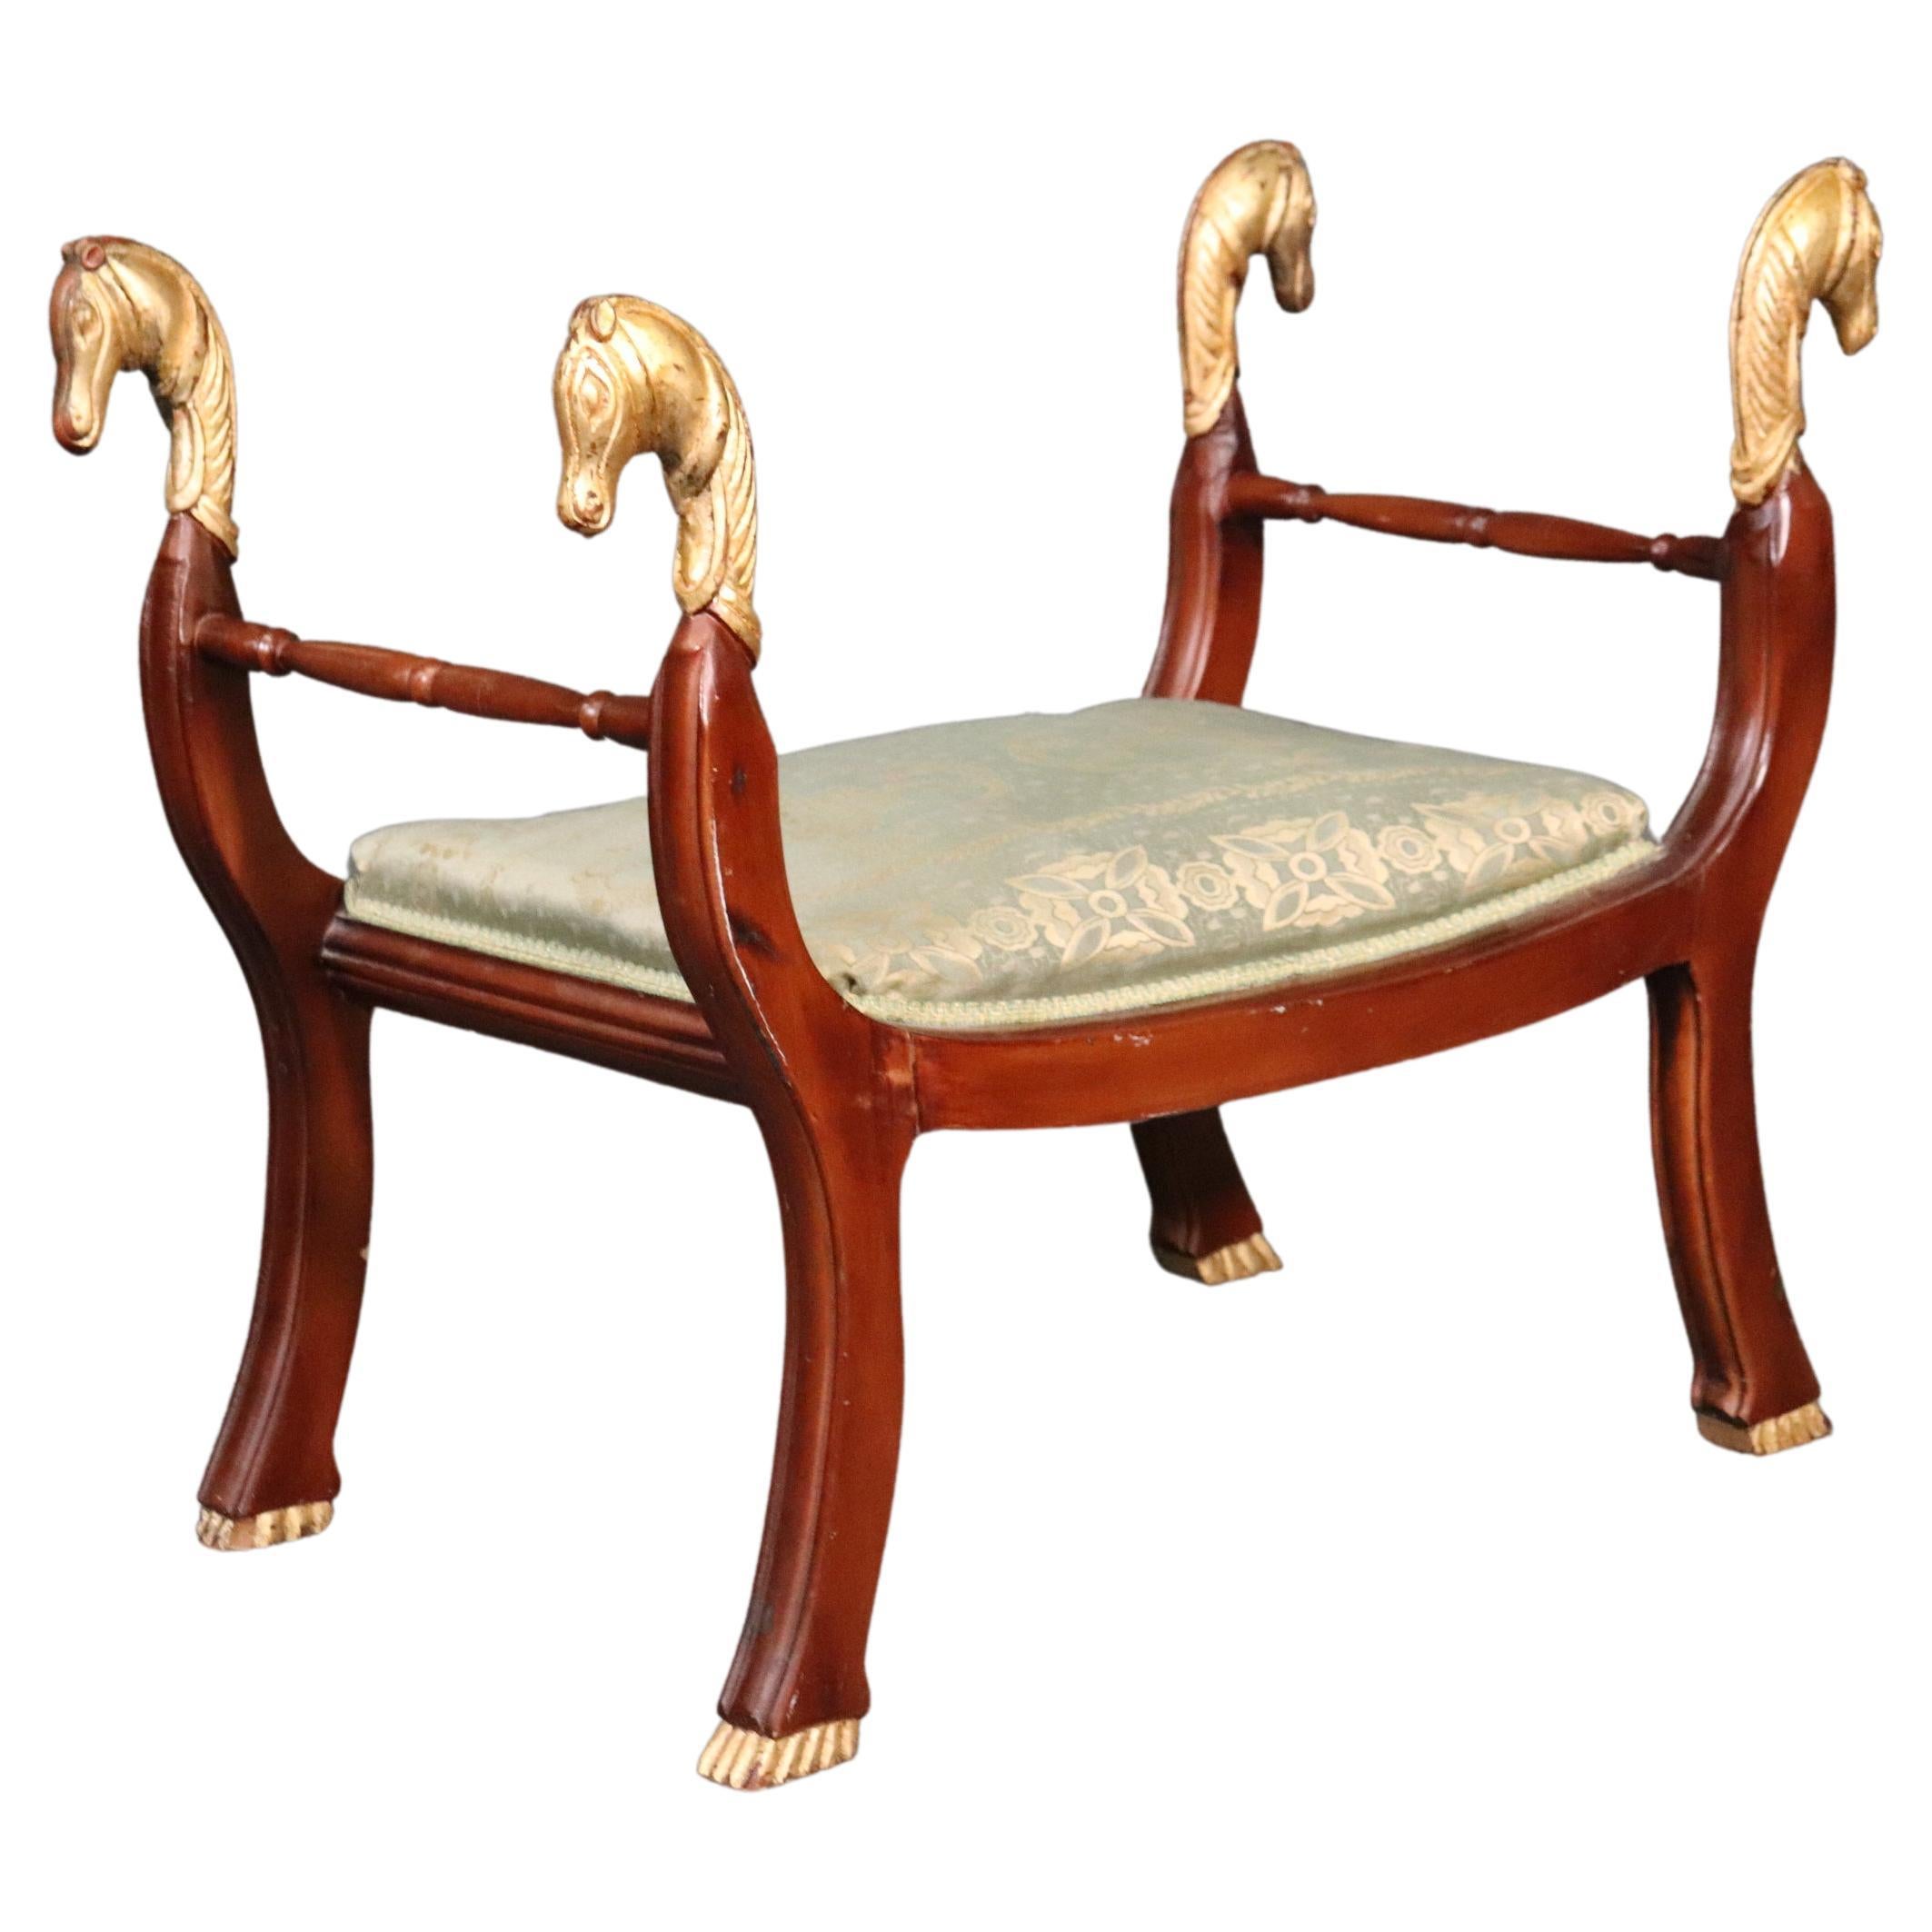 Egyptian Revival Gilded Cerule Form Gilded Horse Head Bench Stool For Sale